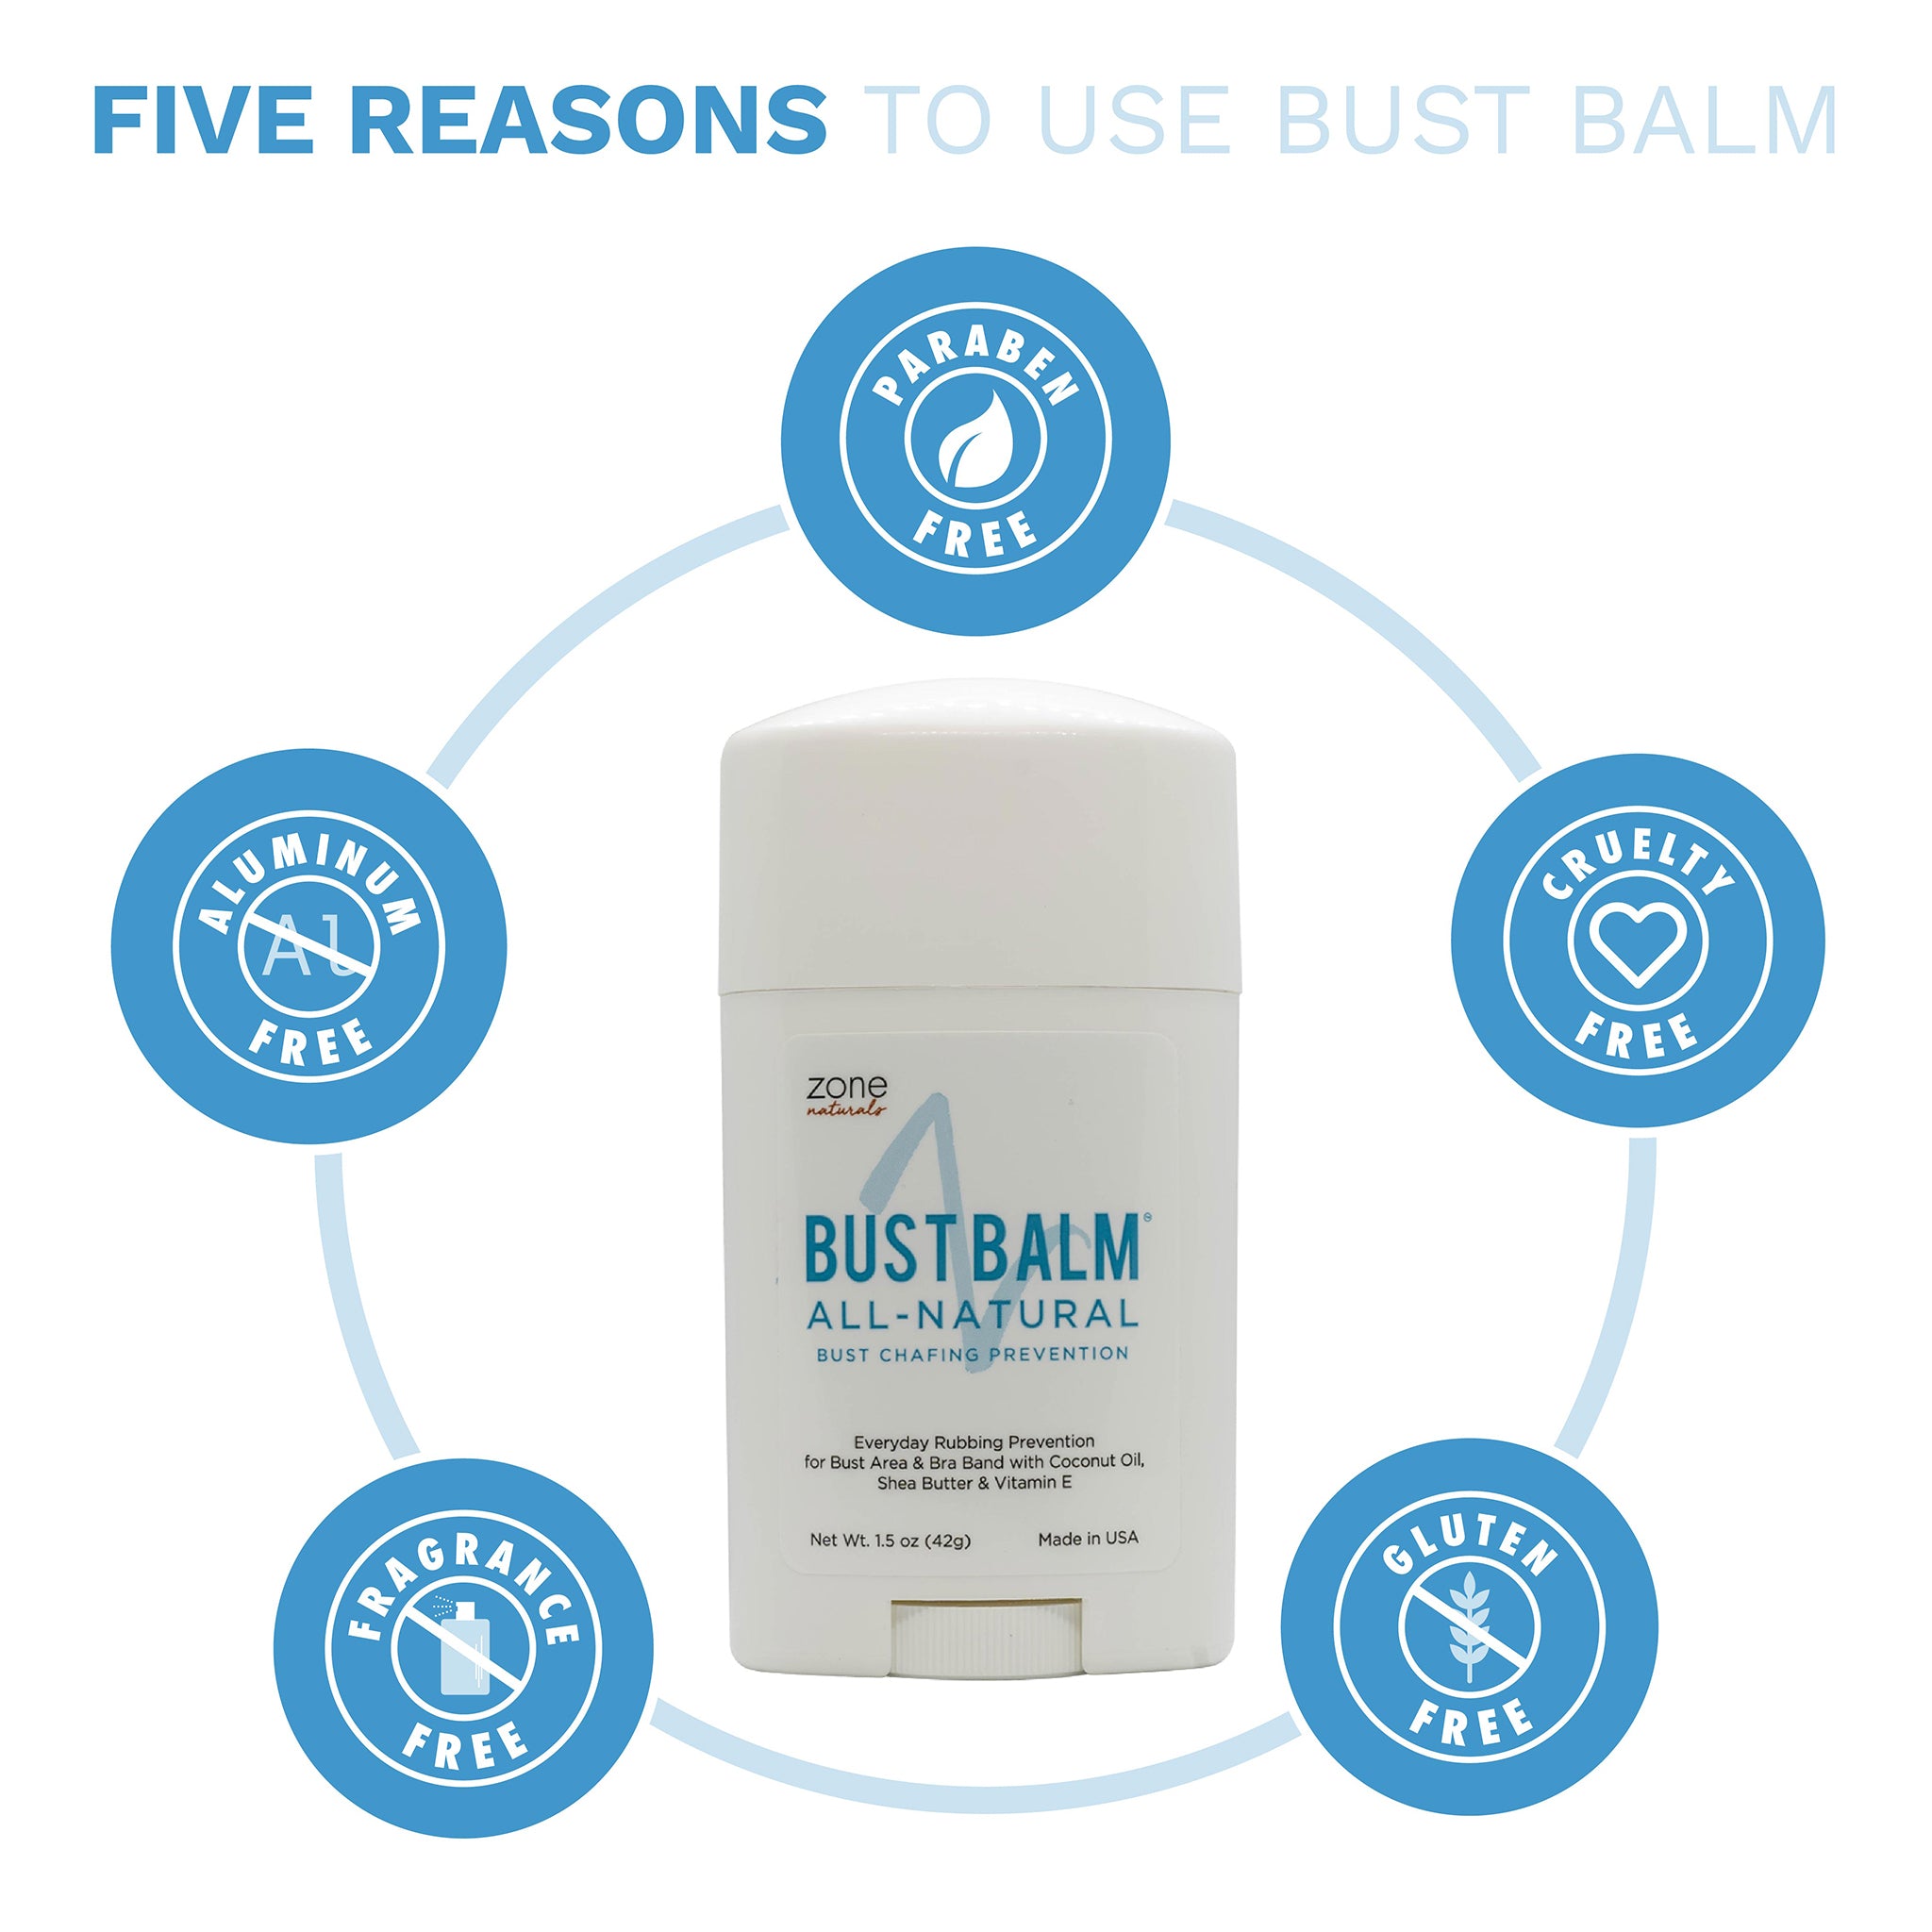 Bust Balm - All-Natural Bust Chafing Stick